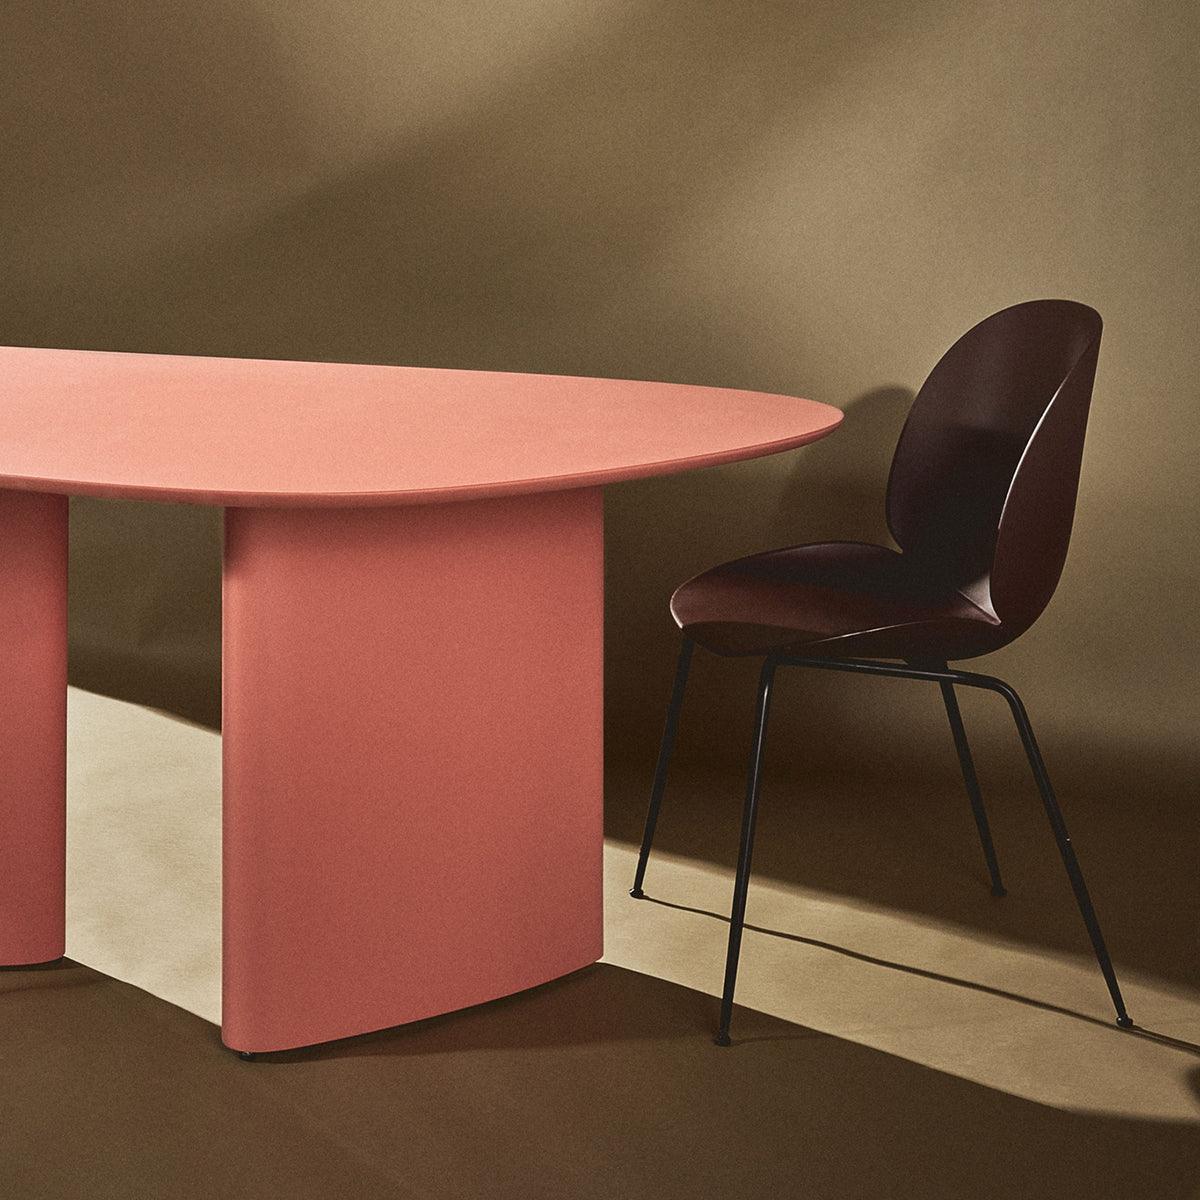 Cells LIM Dining Table - WOO .Design